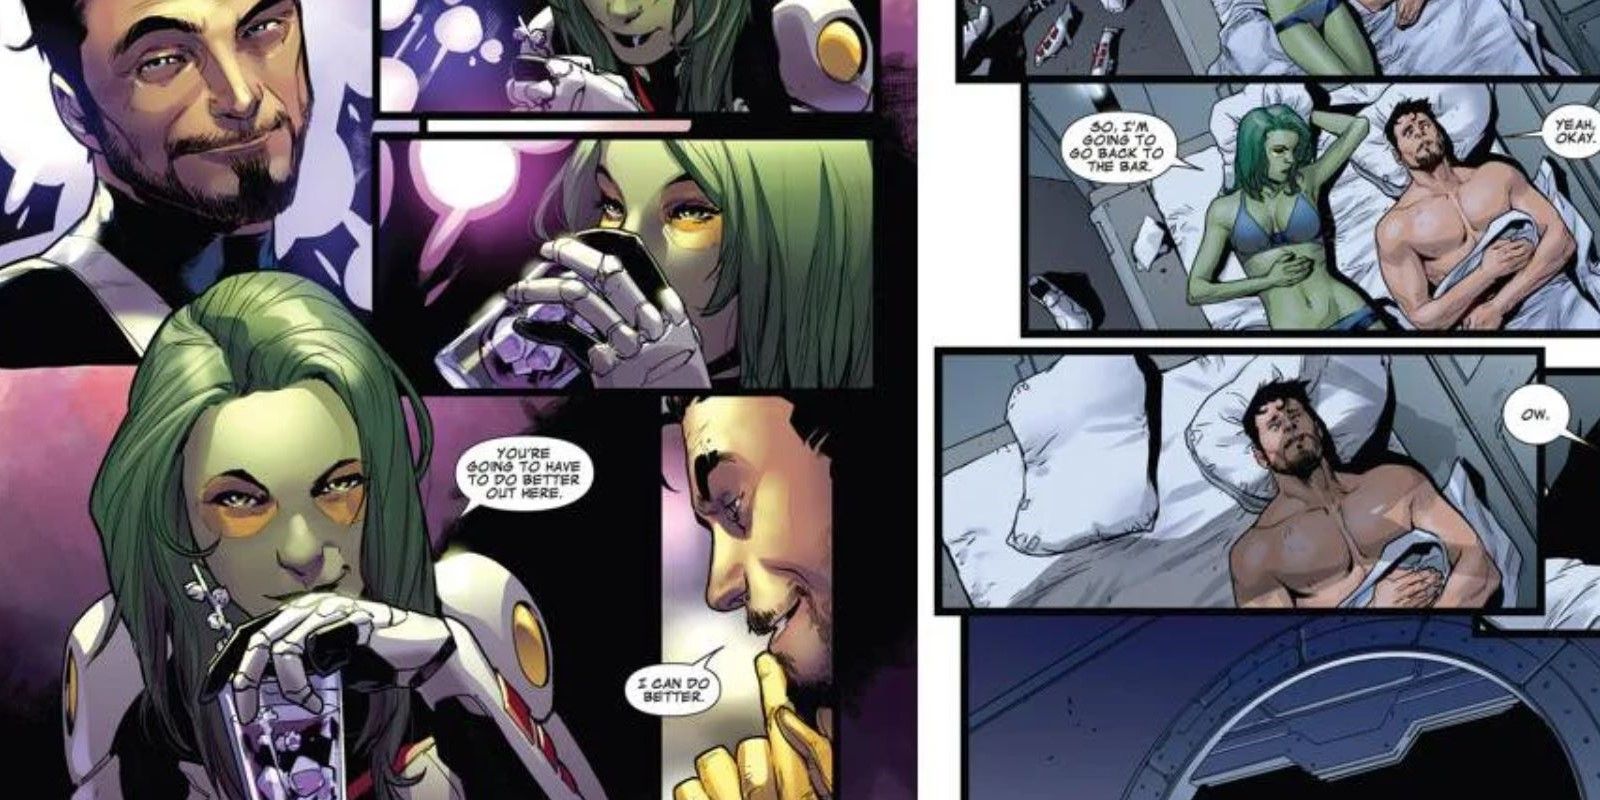 Gamora And Tony Stark flirt with each other in Marvel Comics